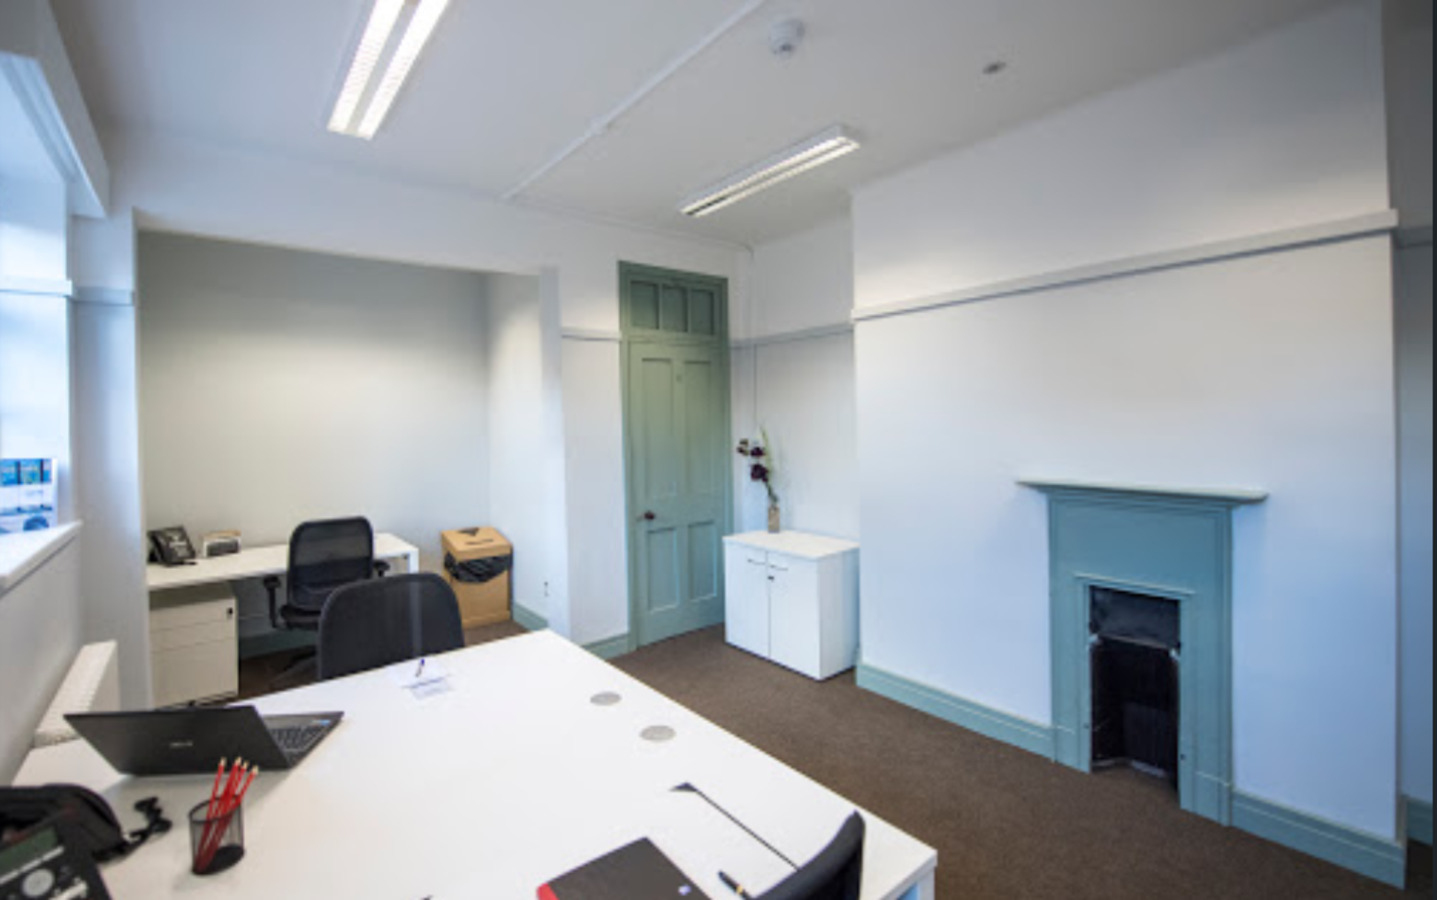 Offices available in Duxford